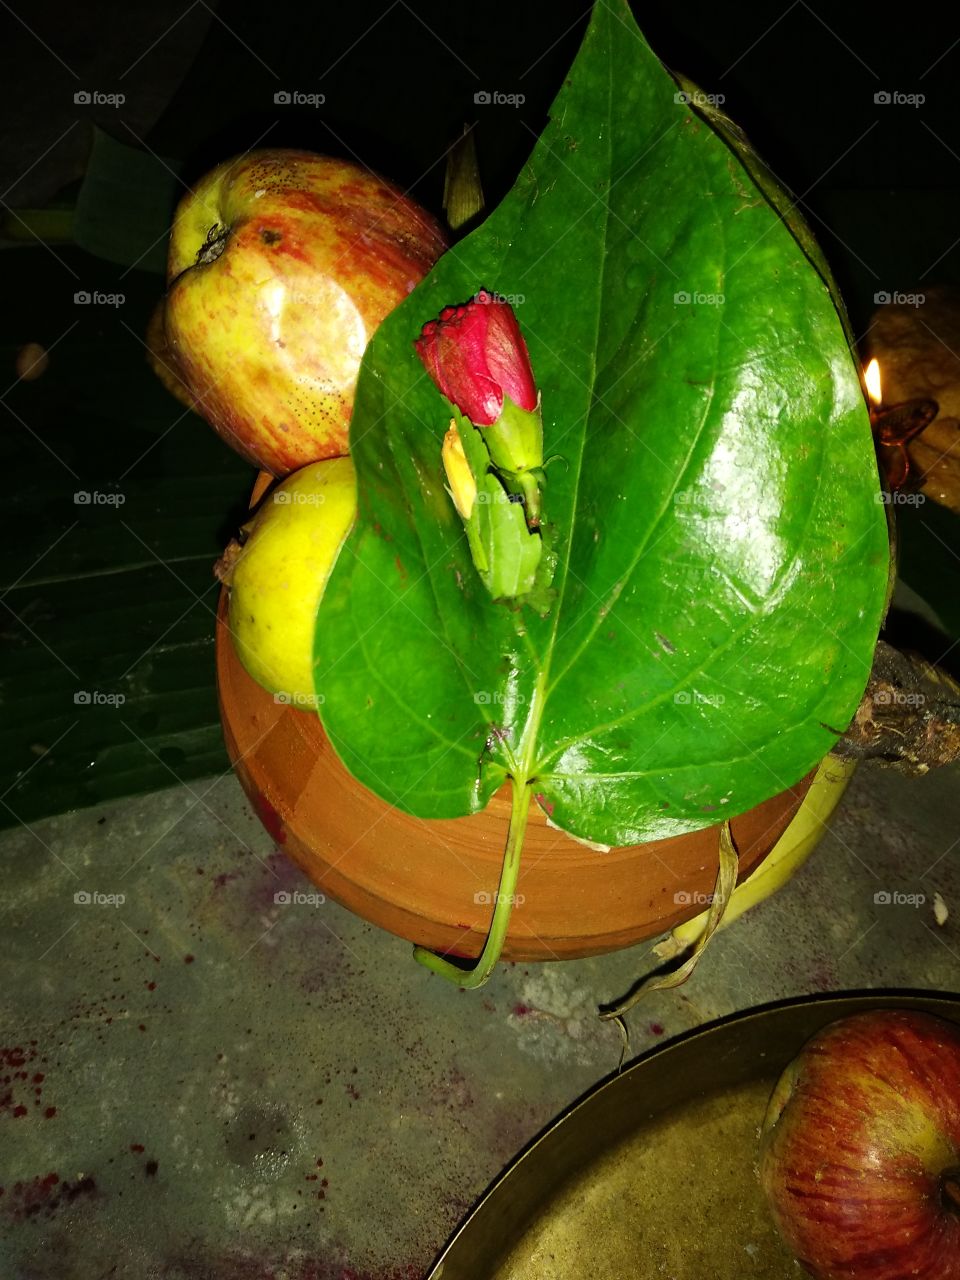 moon worship,bihari culture,worship with fruit and betel leaf,indian villege culture.